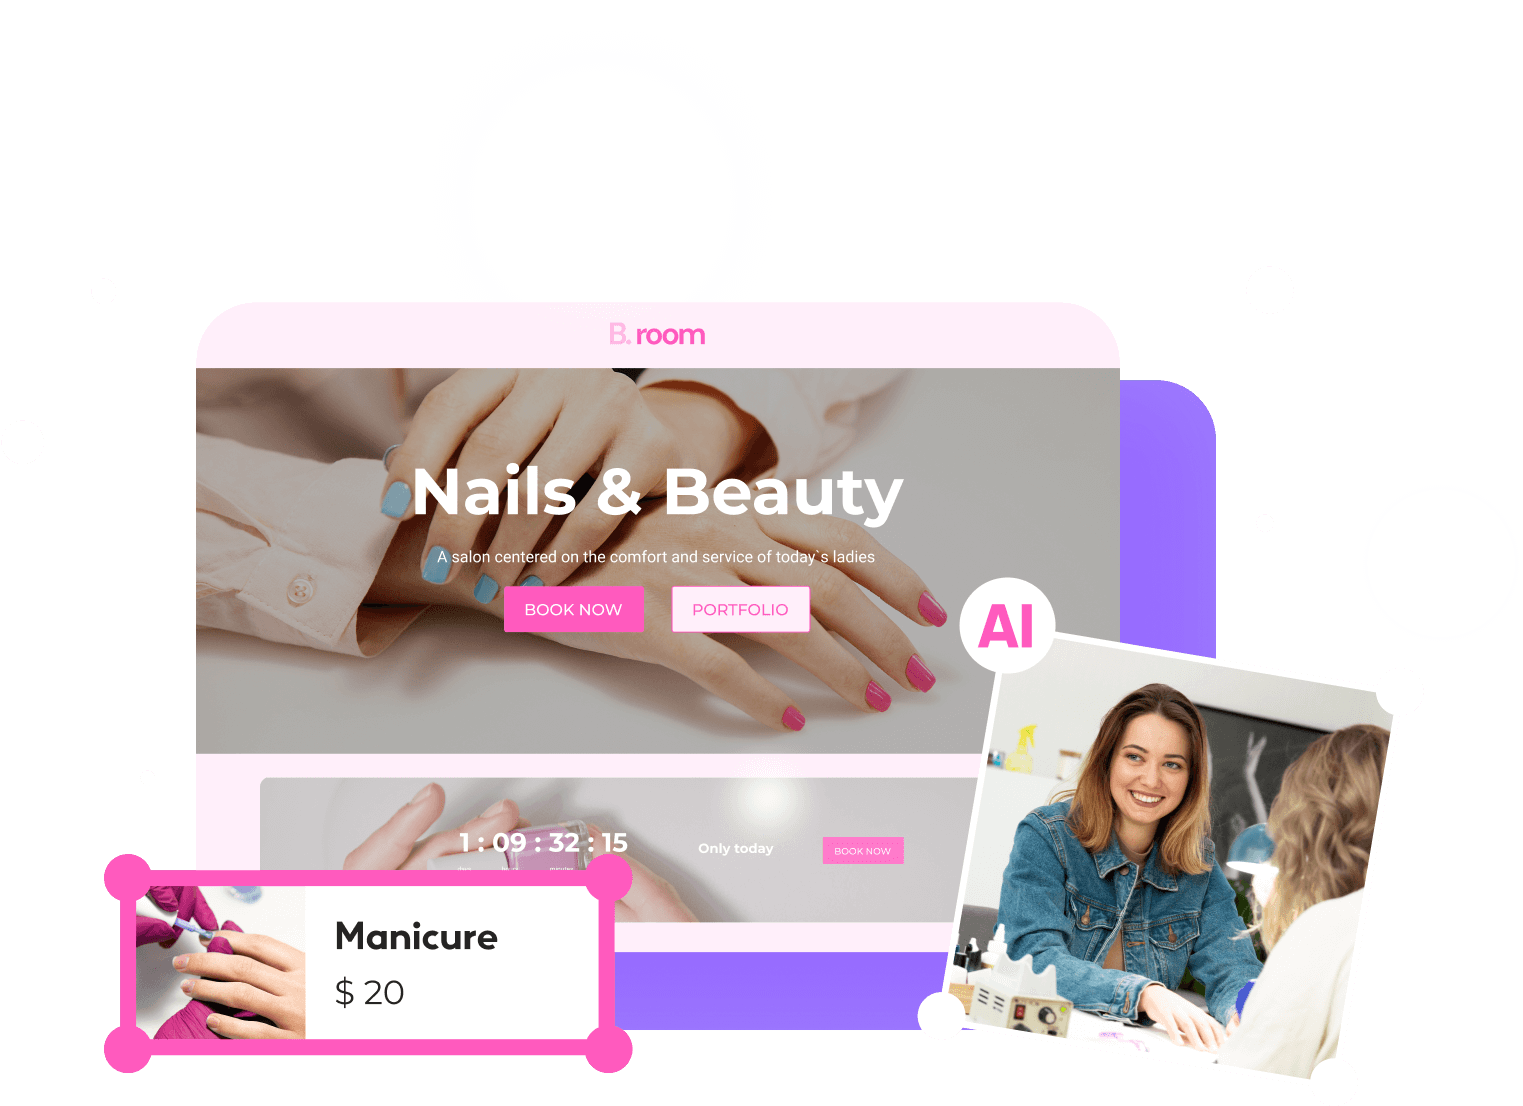 A visually appealing website, representing a hub for all things related to nail care and beauty services.